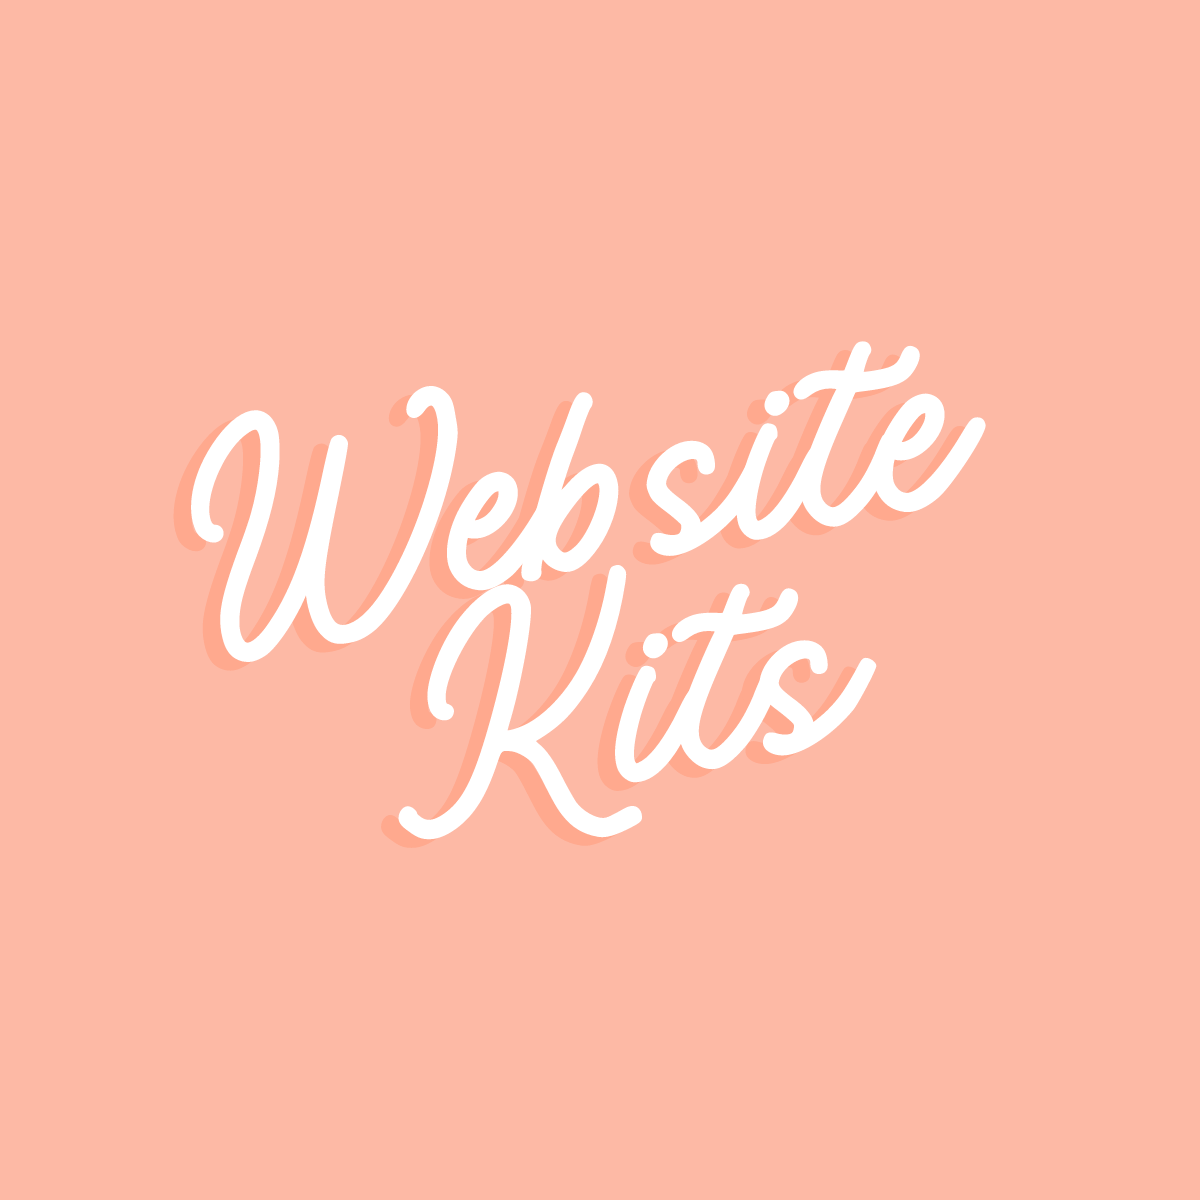 Done For You Website Kits